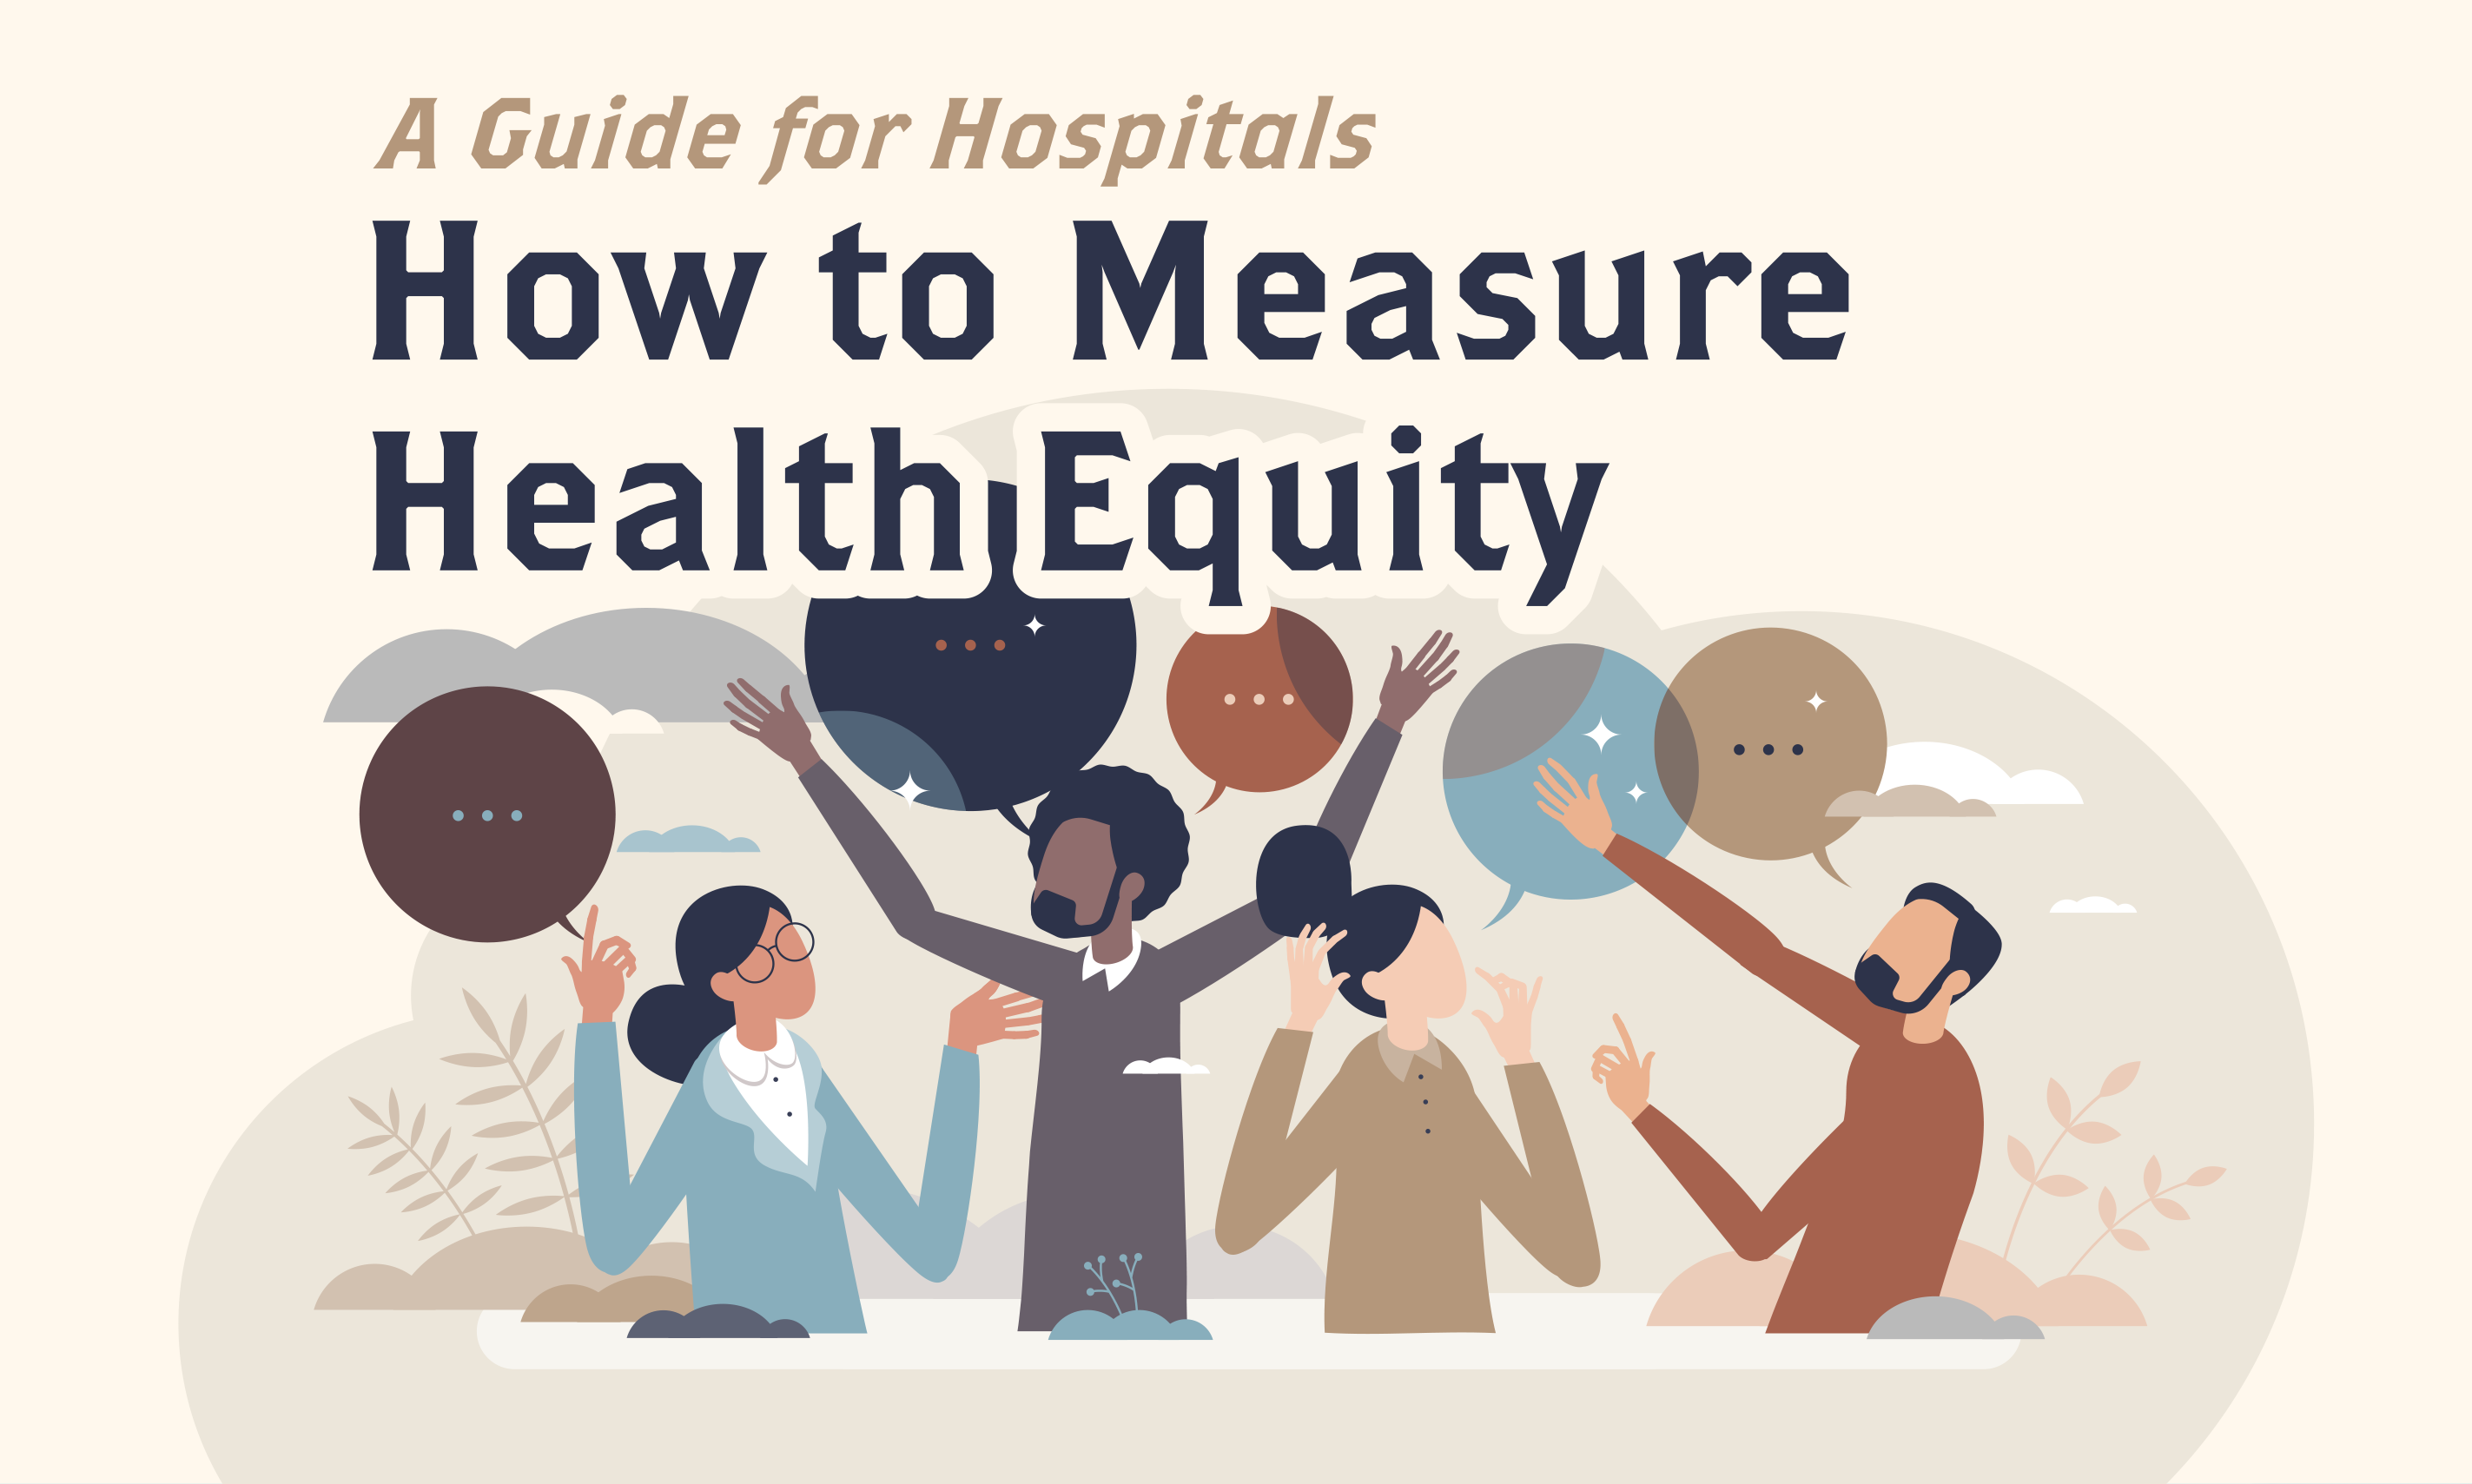 How to Measure Health Equity